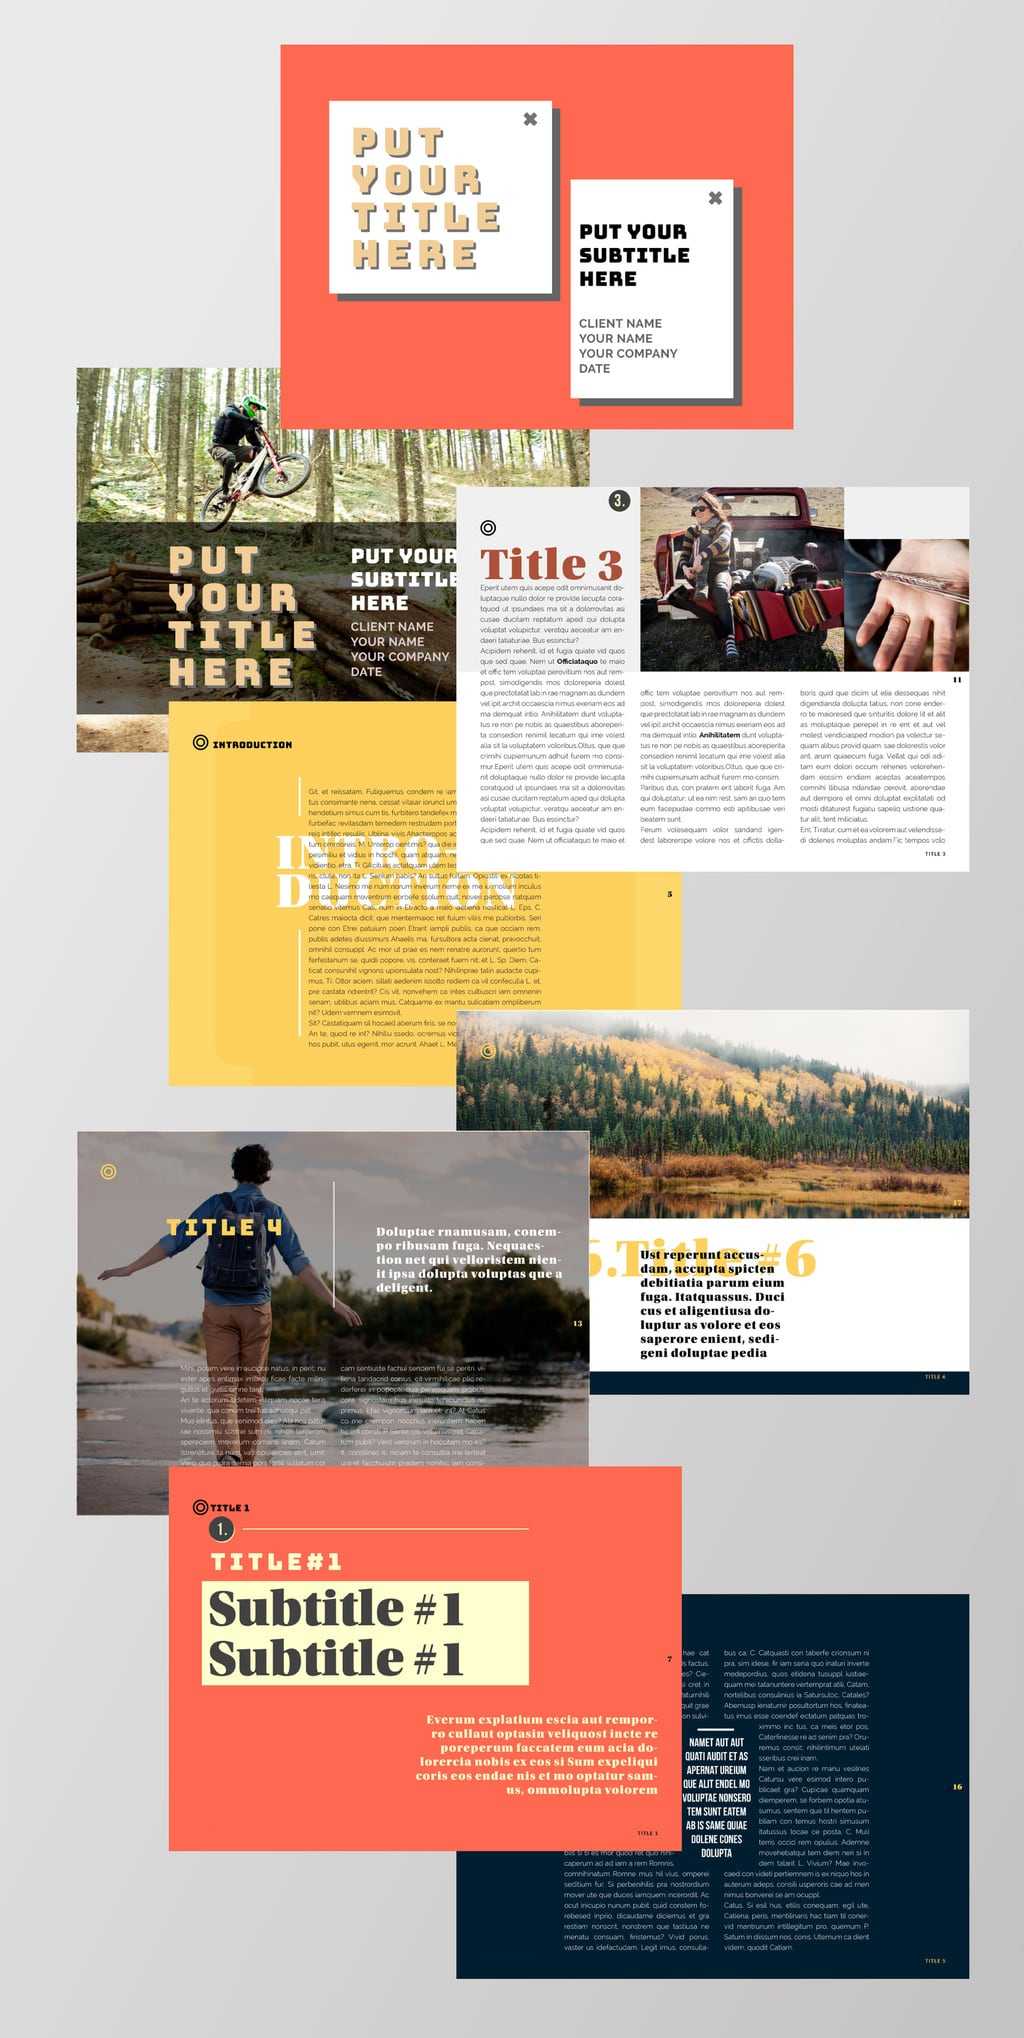 75 Fresh Indesign Templates And Where To Find More Throughout Indesign Templates Free Download Brochure